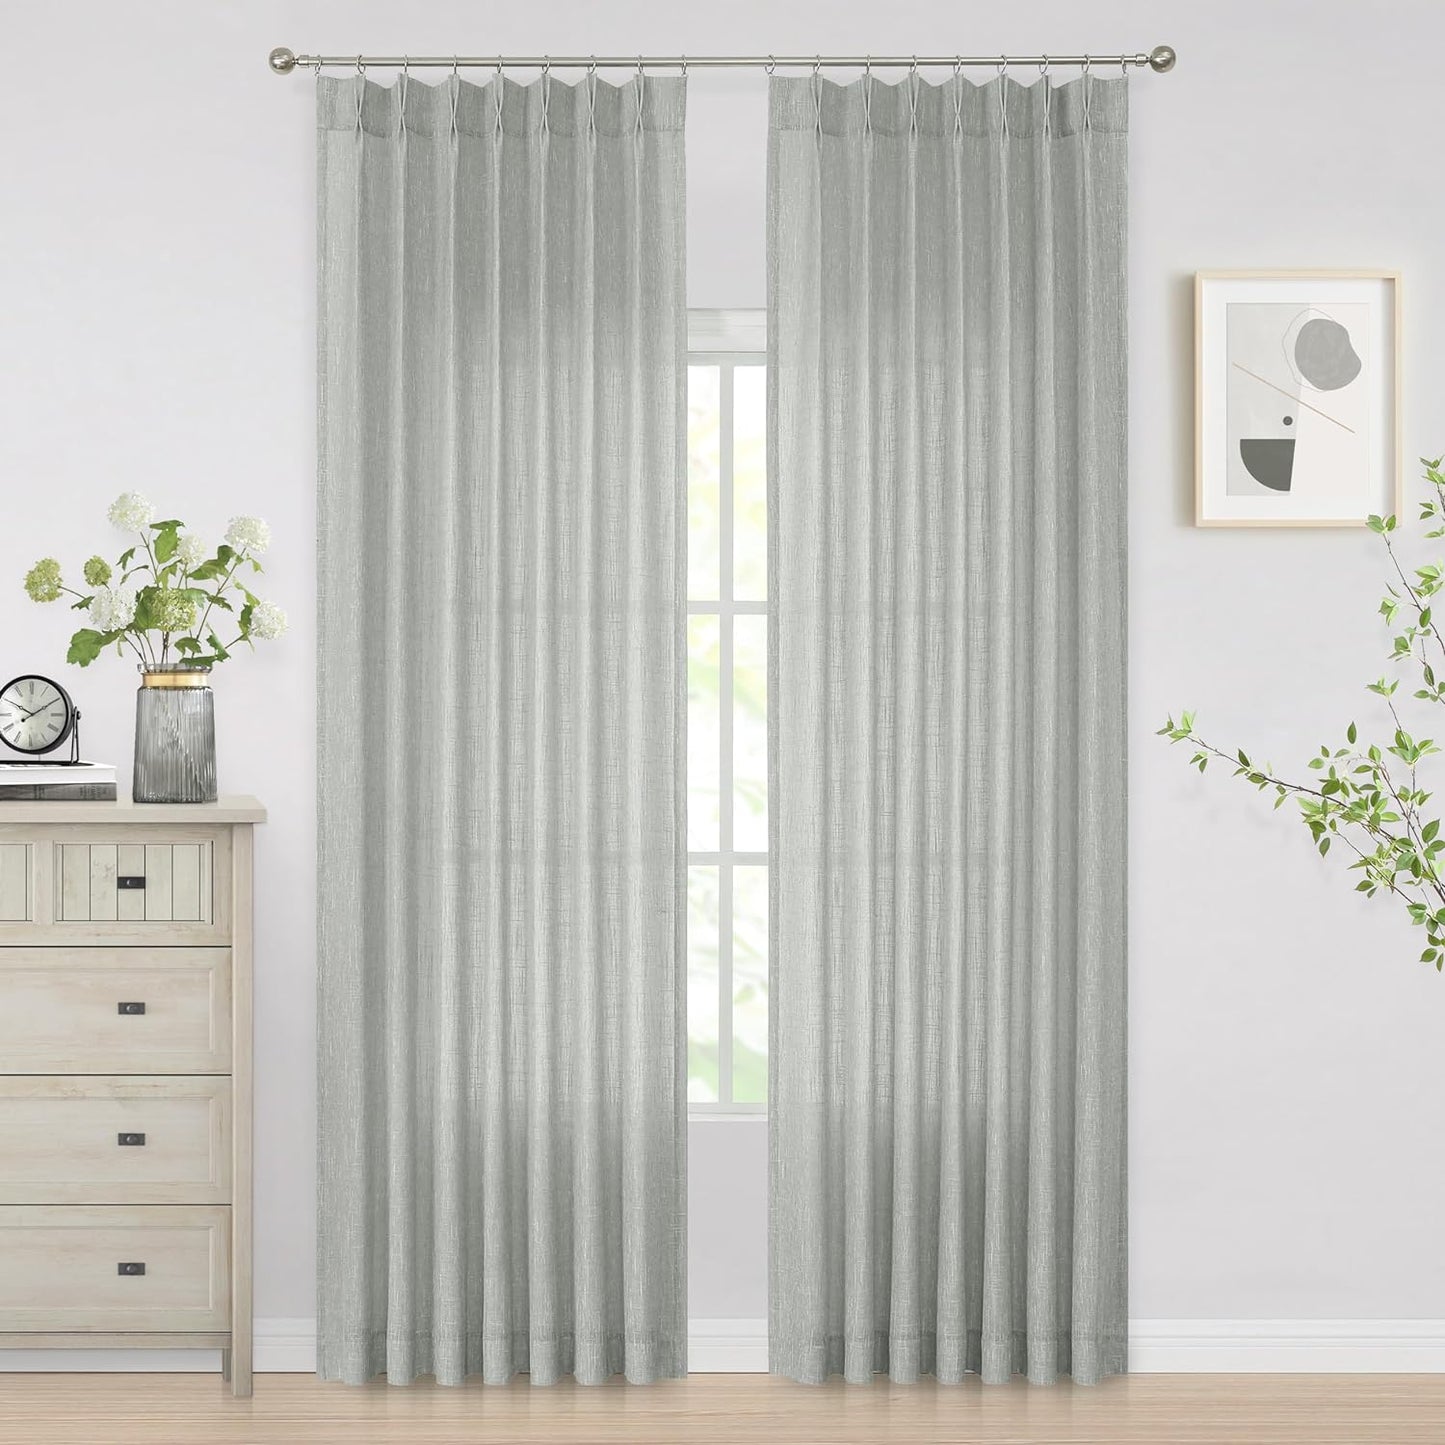 Vision Home Natural Pinch Pleated Semi Sheer Curtains Textured Linen Blended Light Filtering Window Curtains 84 Inch for Living Room Bedroom Pinch Pleat Drapes with Hooks 2 Panels 42" Wx84 L  Vision Home Light Grey/Pinch 40"X95"X2 